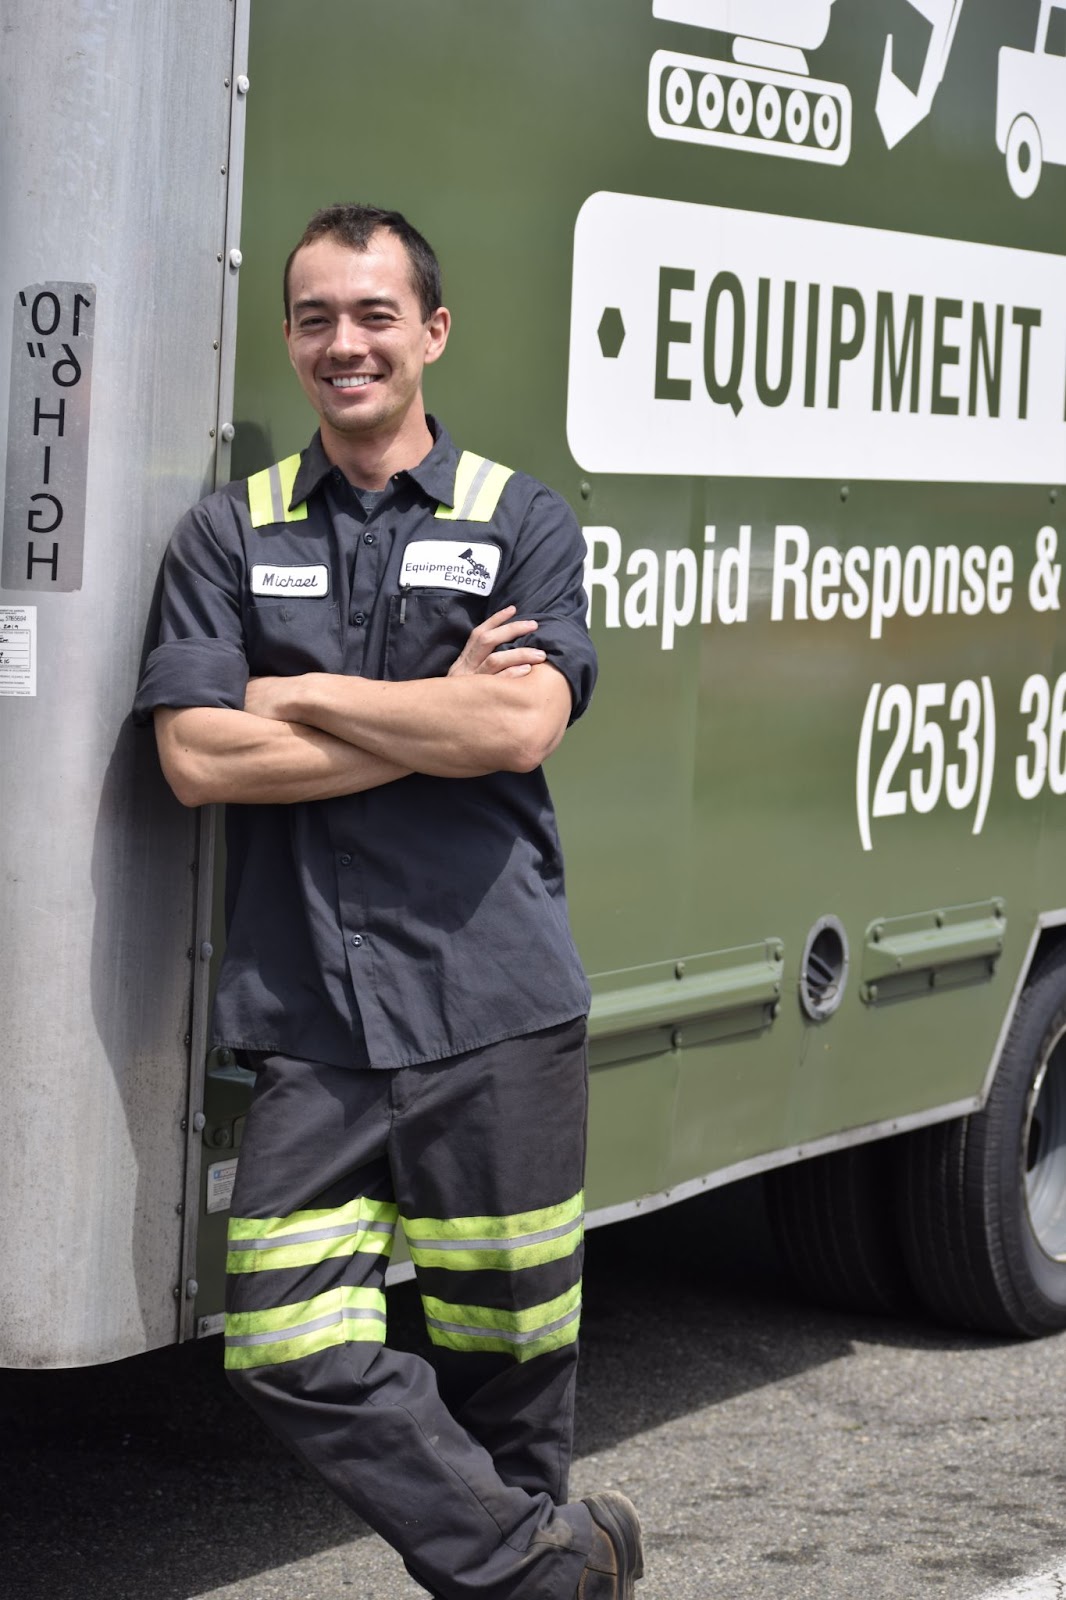 An Equipment Experts technician smiling in front of an Equipment Experts fleet vehicle